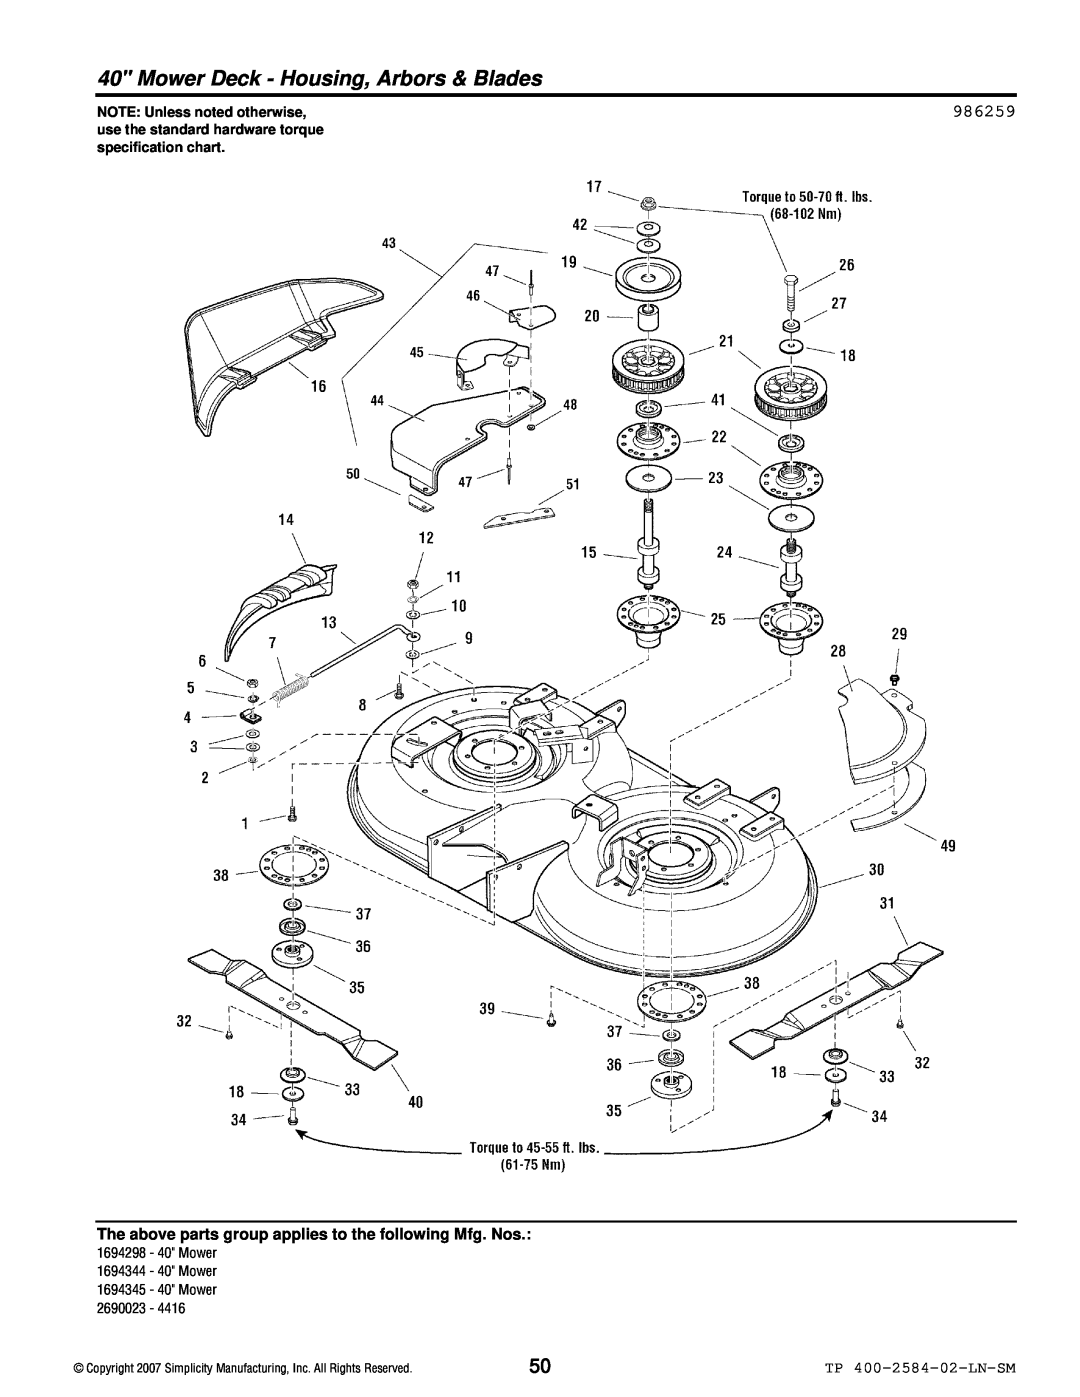 Simplicity Lancer / 4400 986259, Mower Deck - Housing, Arbors & Blades, TP 400-2584-02-LN-SM, NOTE Unless noted otherwise 